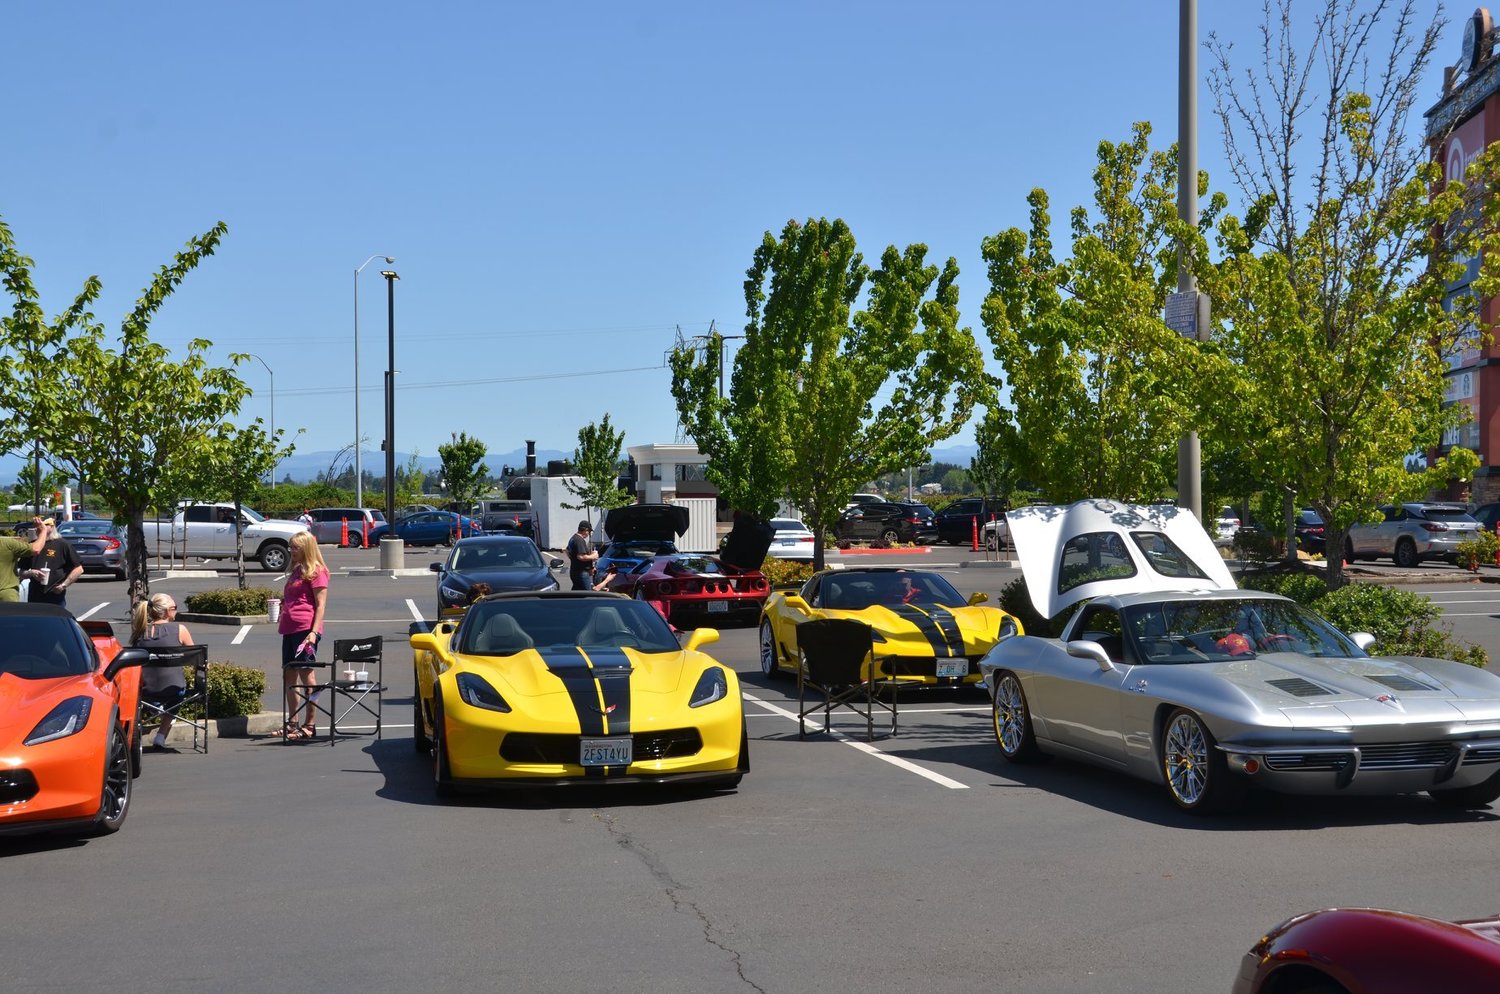 More than 20 members of the NW Corvette Association car club went down to In-N-Out Burger for a “social distance drive” last year.